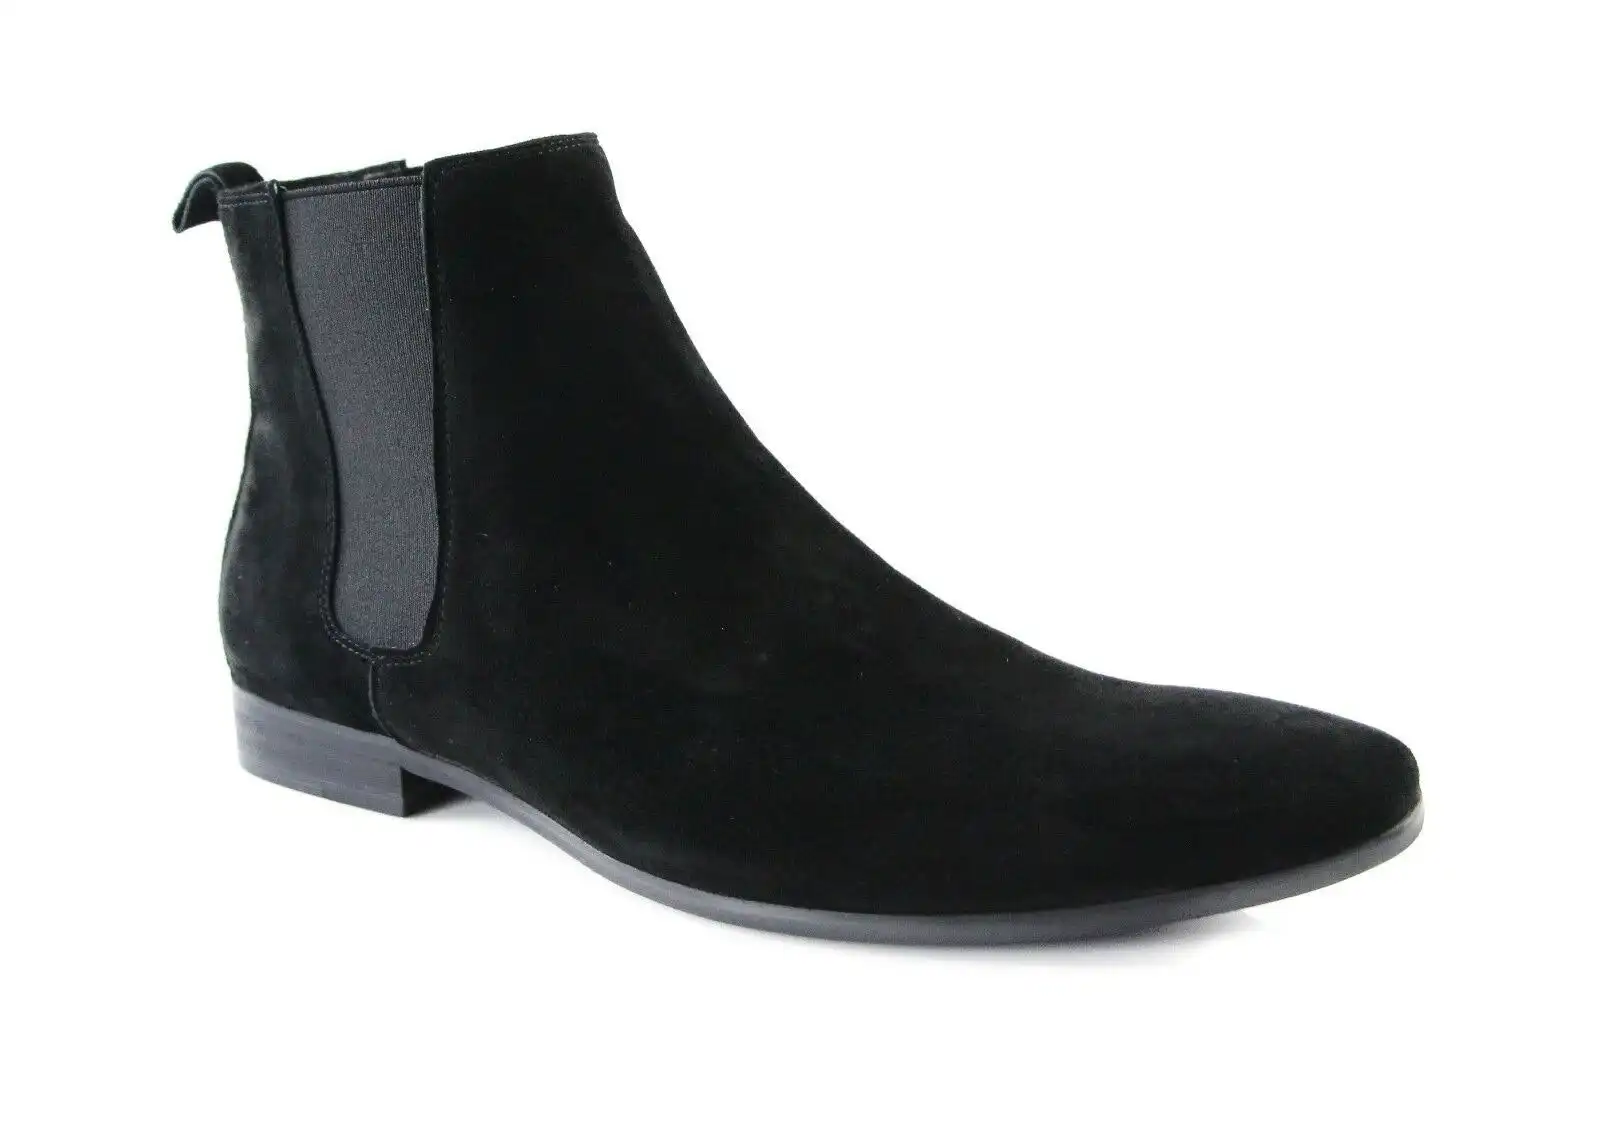 Zasel Andreas Black Suede Leather Slip On Dress Casual Work Shoes Mens Boots